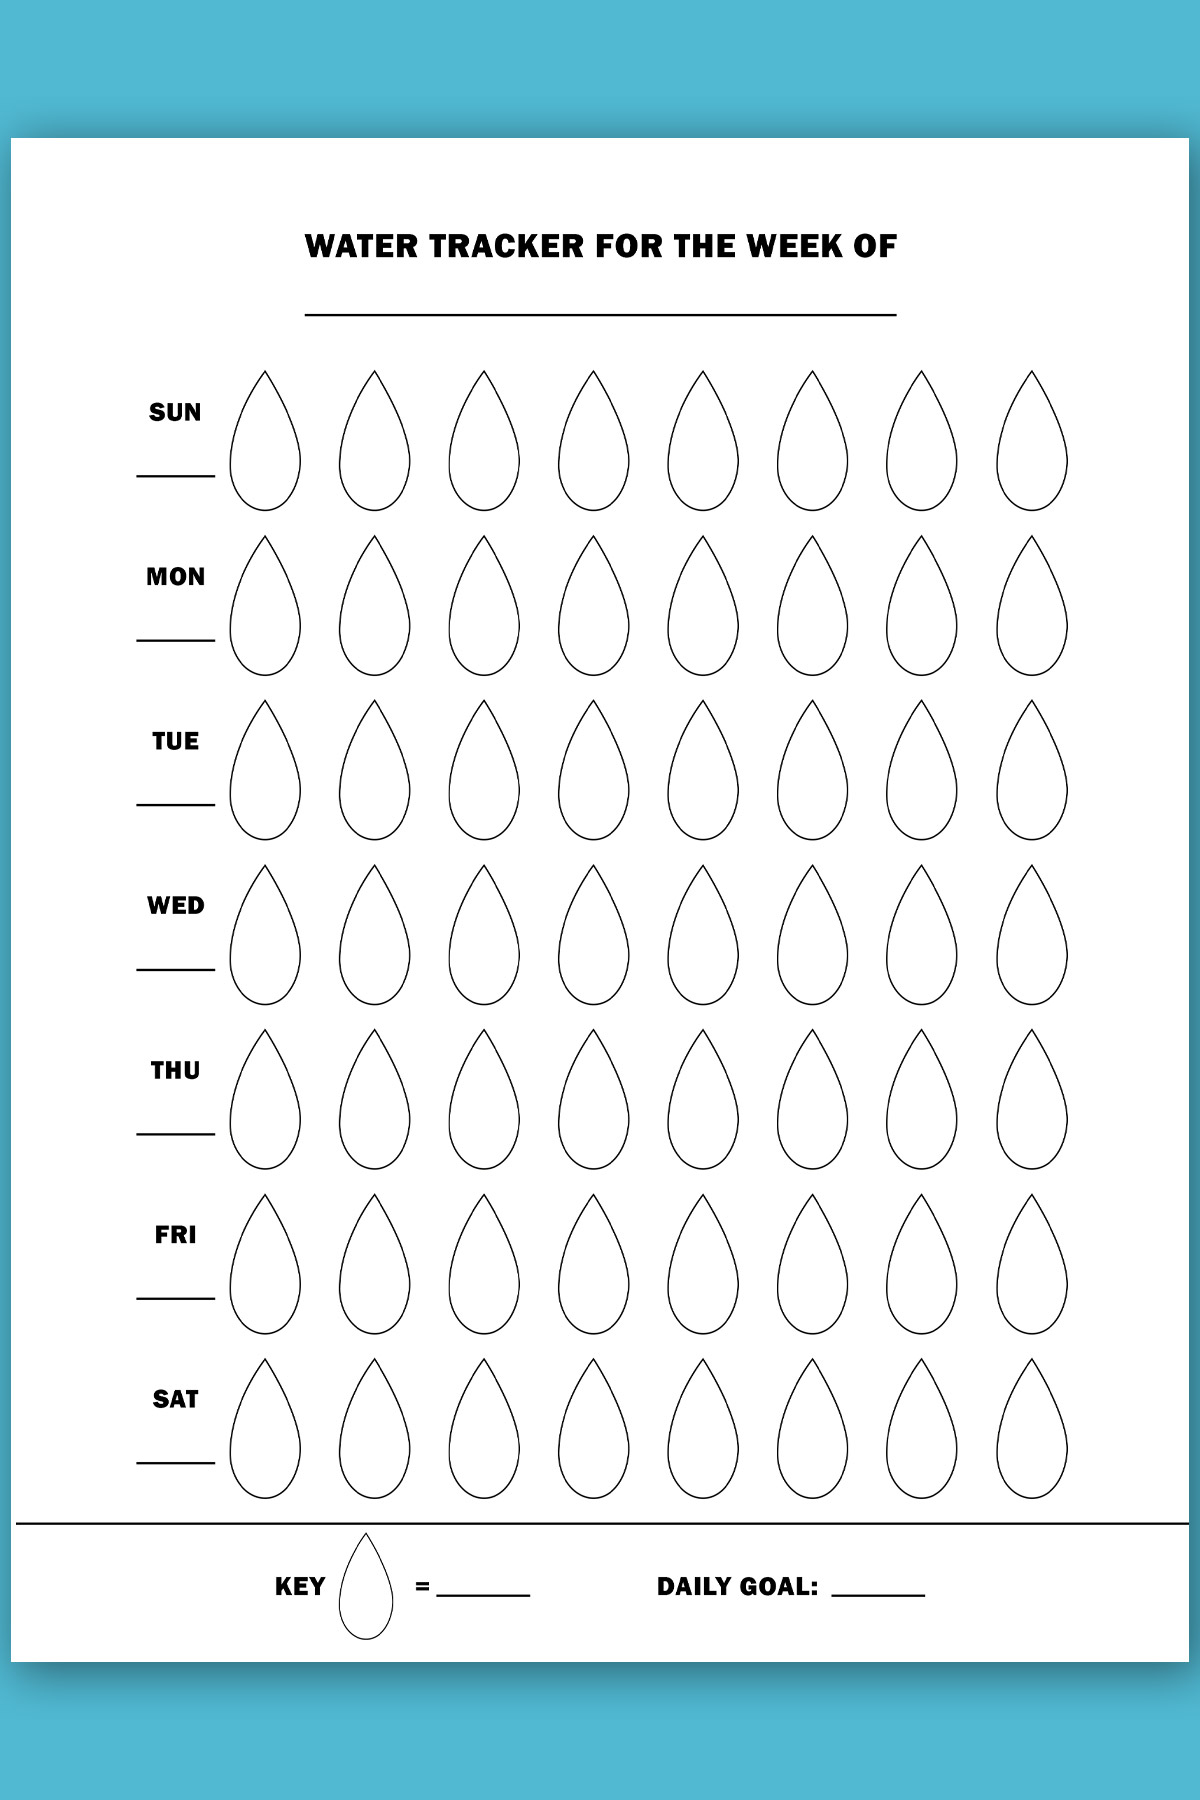 This image is an example of one of the water tracker printable options from the free printable water tracker set you can get for free in this blog post. It's an example of a water droplet weekly tracker.